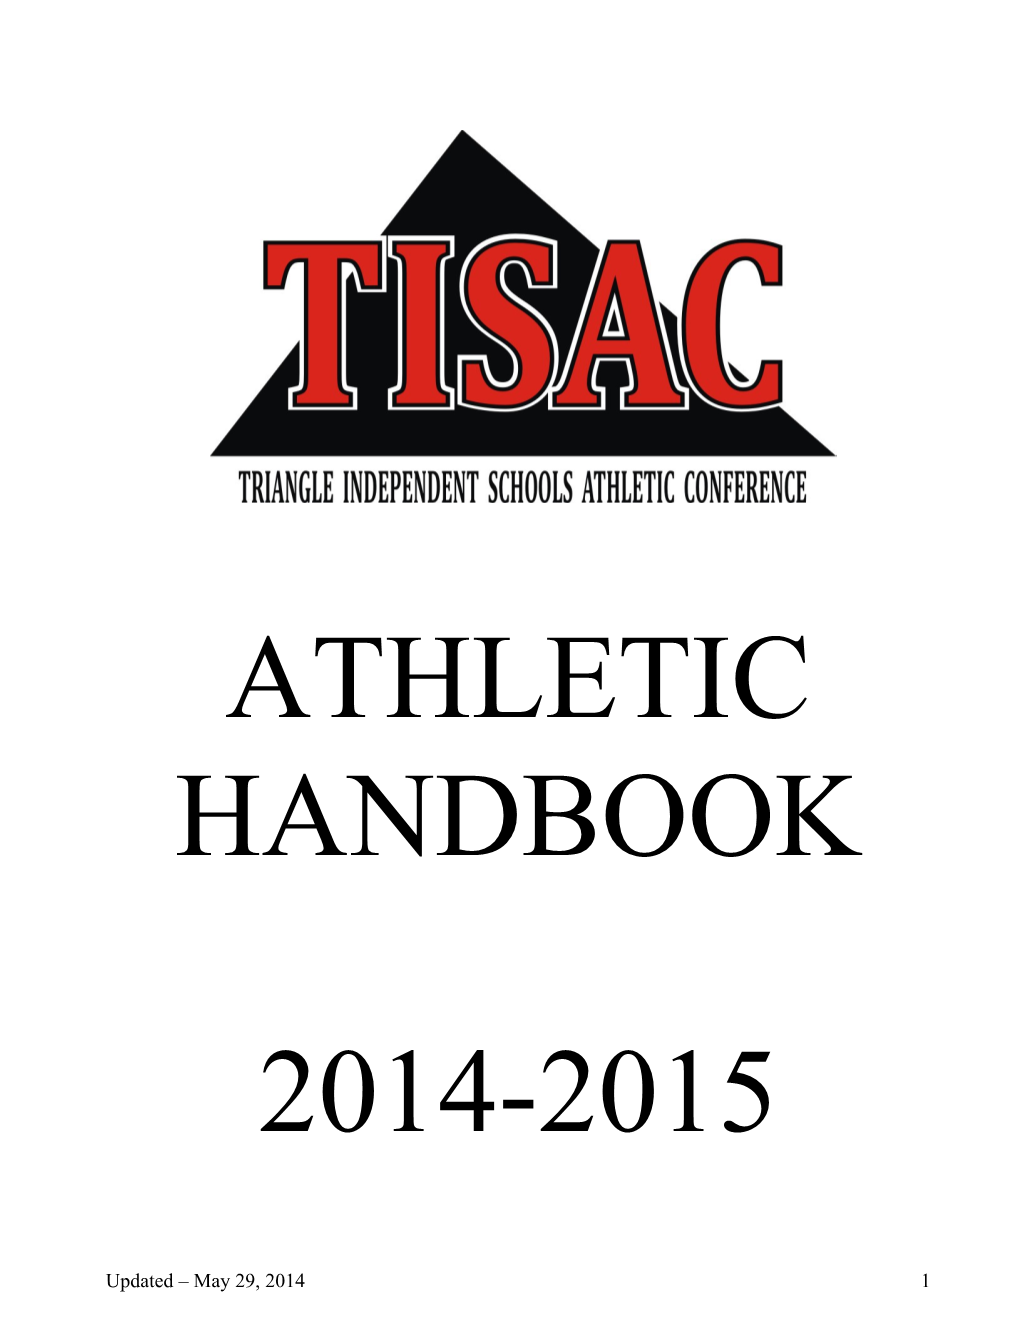 Triangle Independent Schools Athletic Conference